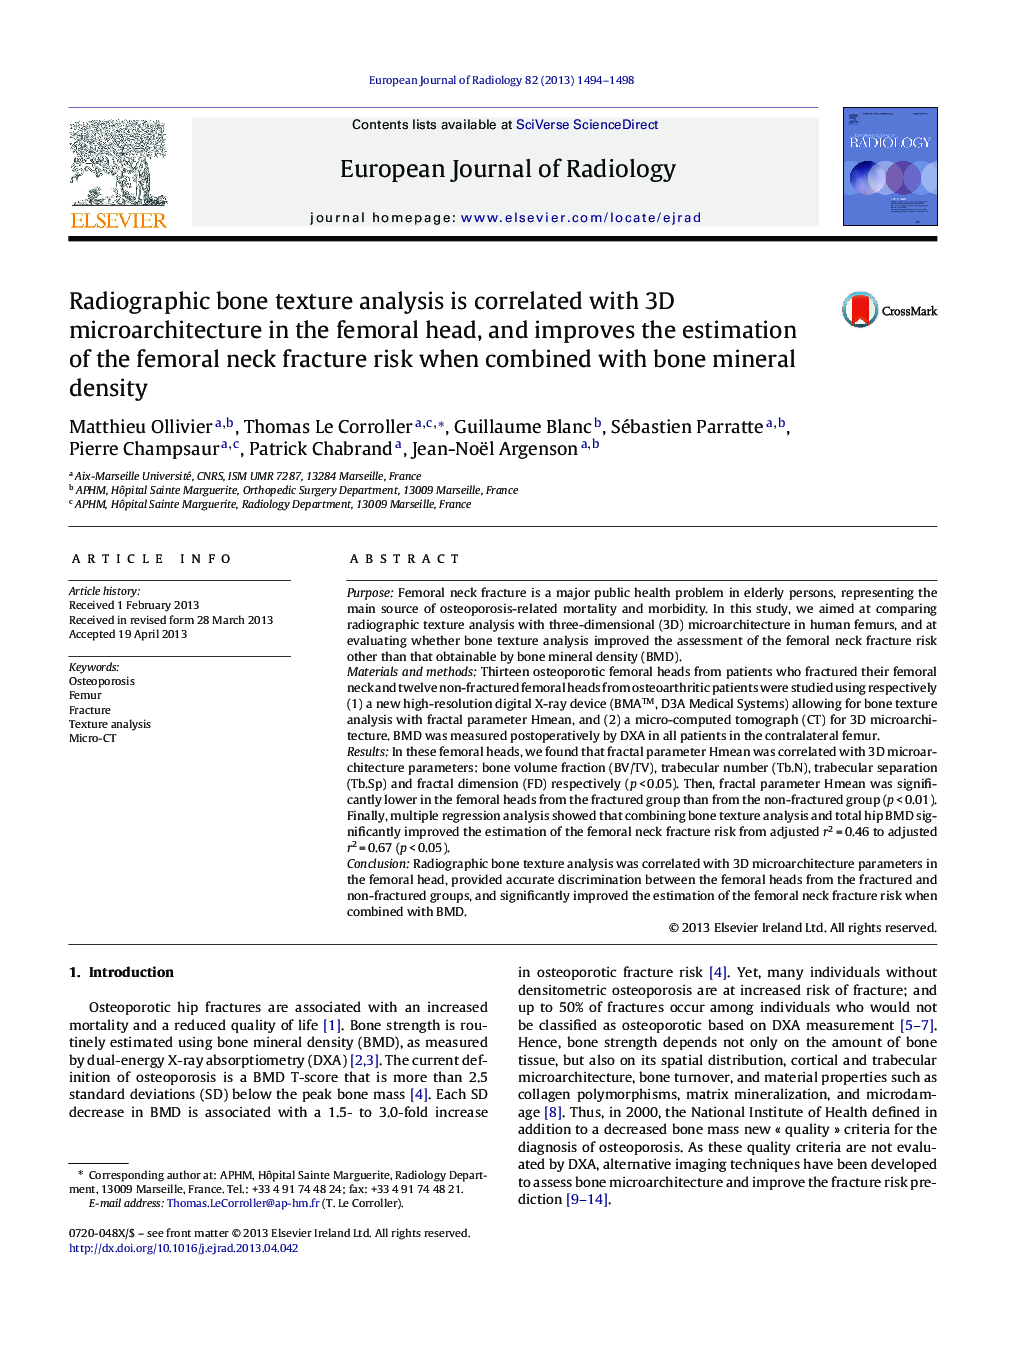 Radiographic bone texture analysis is correlated with 3D microarchitecture in the femoral head, and improves the estimation of the femoral neck fracture risk when combined with bone mineral density